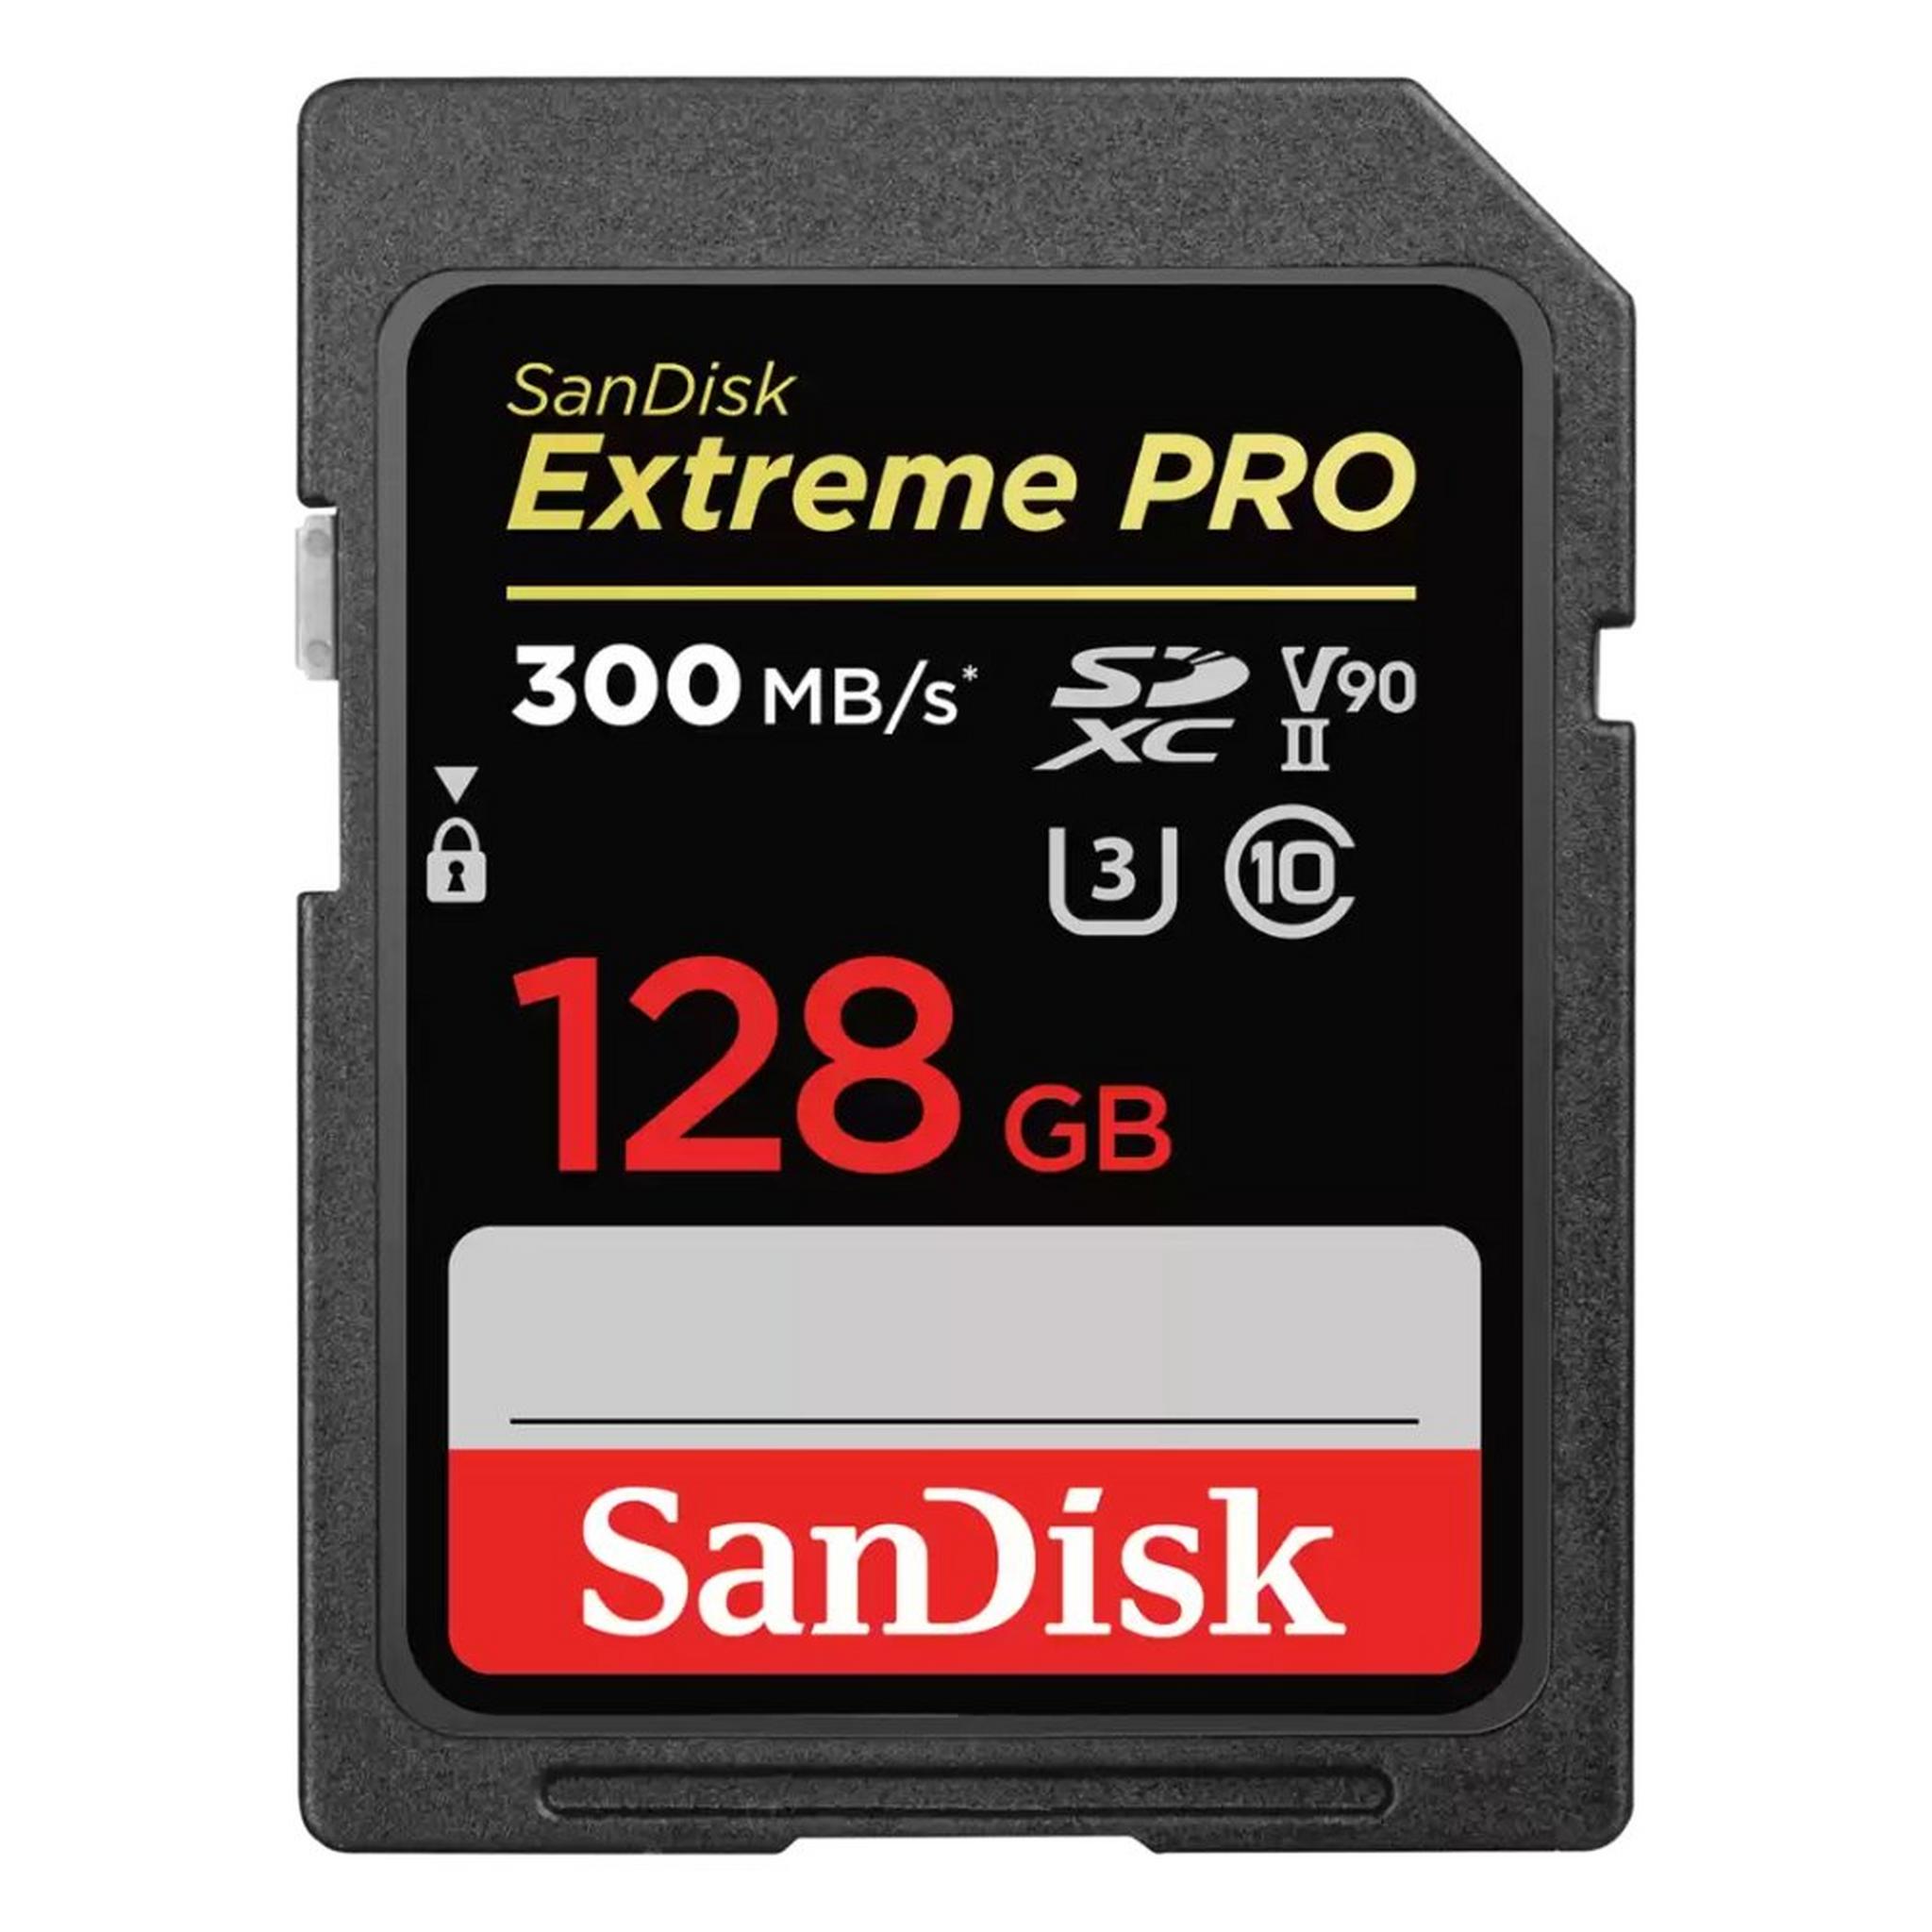 SanDisk Extreme Pro SDXC 128 GB Class 10 8K UHS-II V90 Memory Card, SDSDXDK-128G-GN4IN